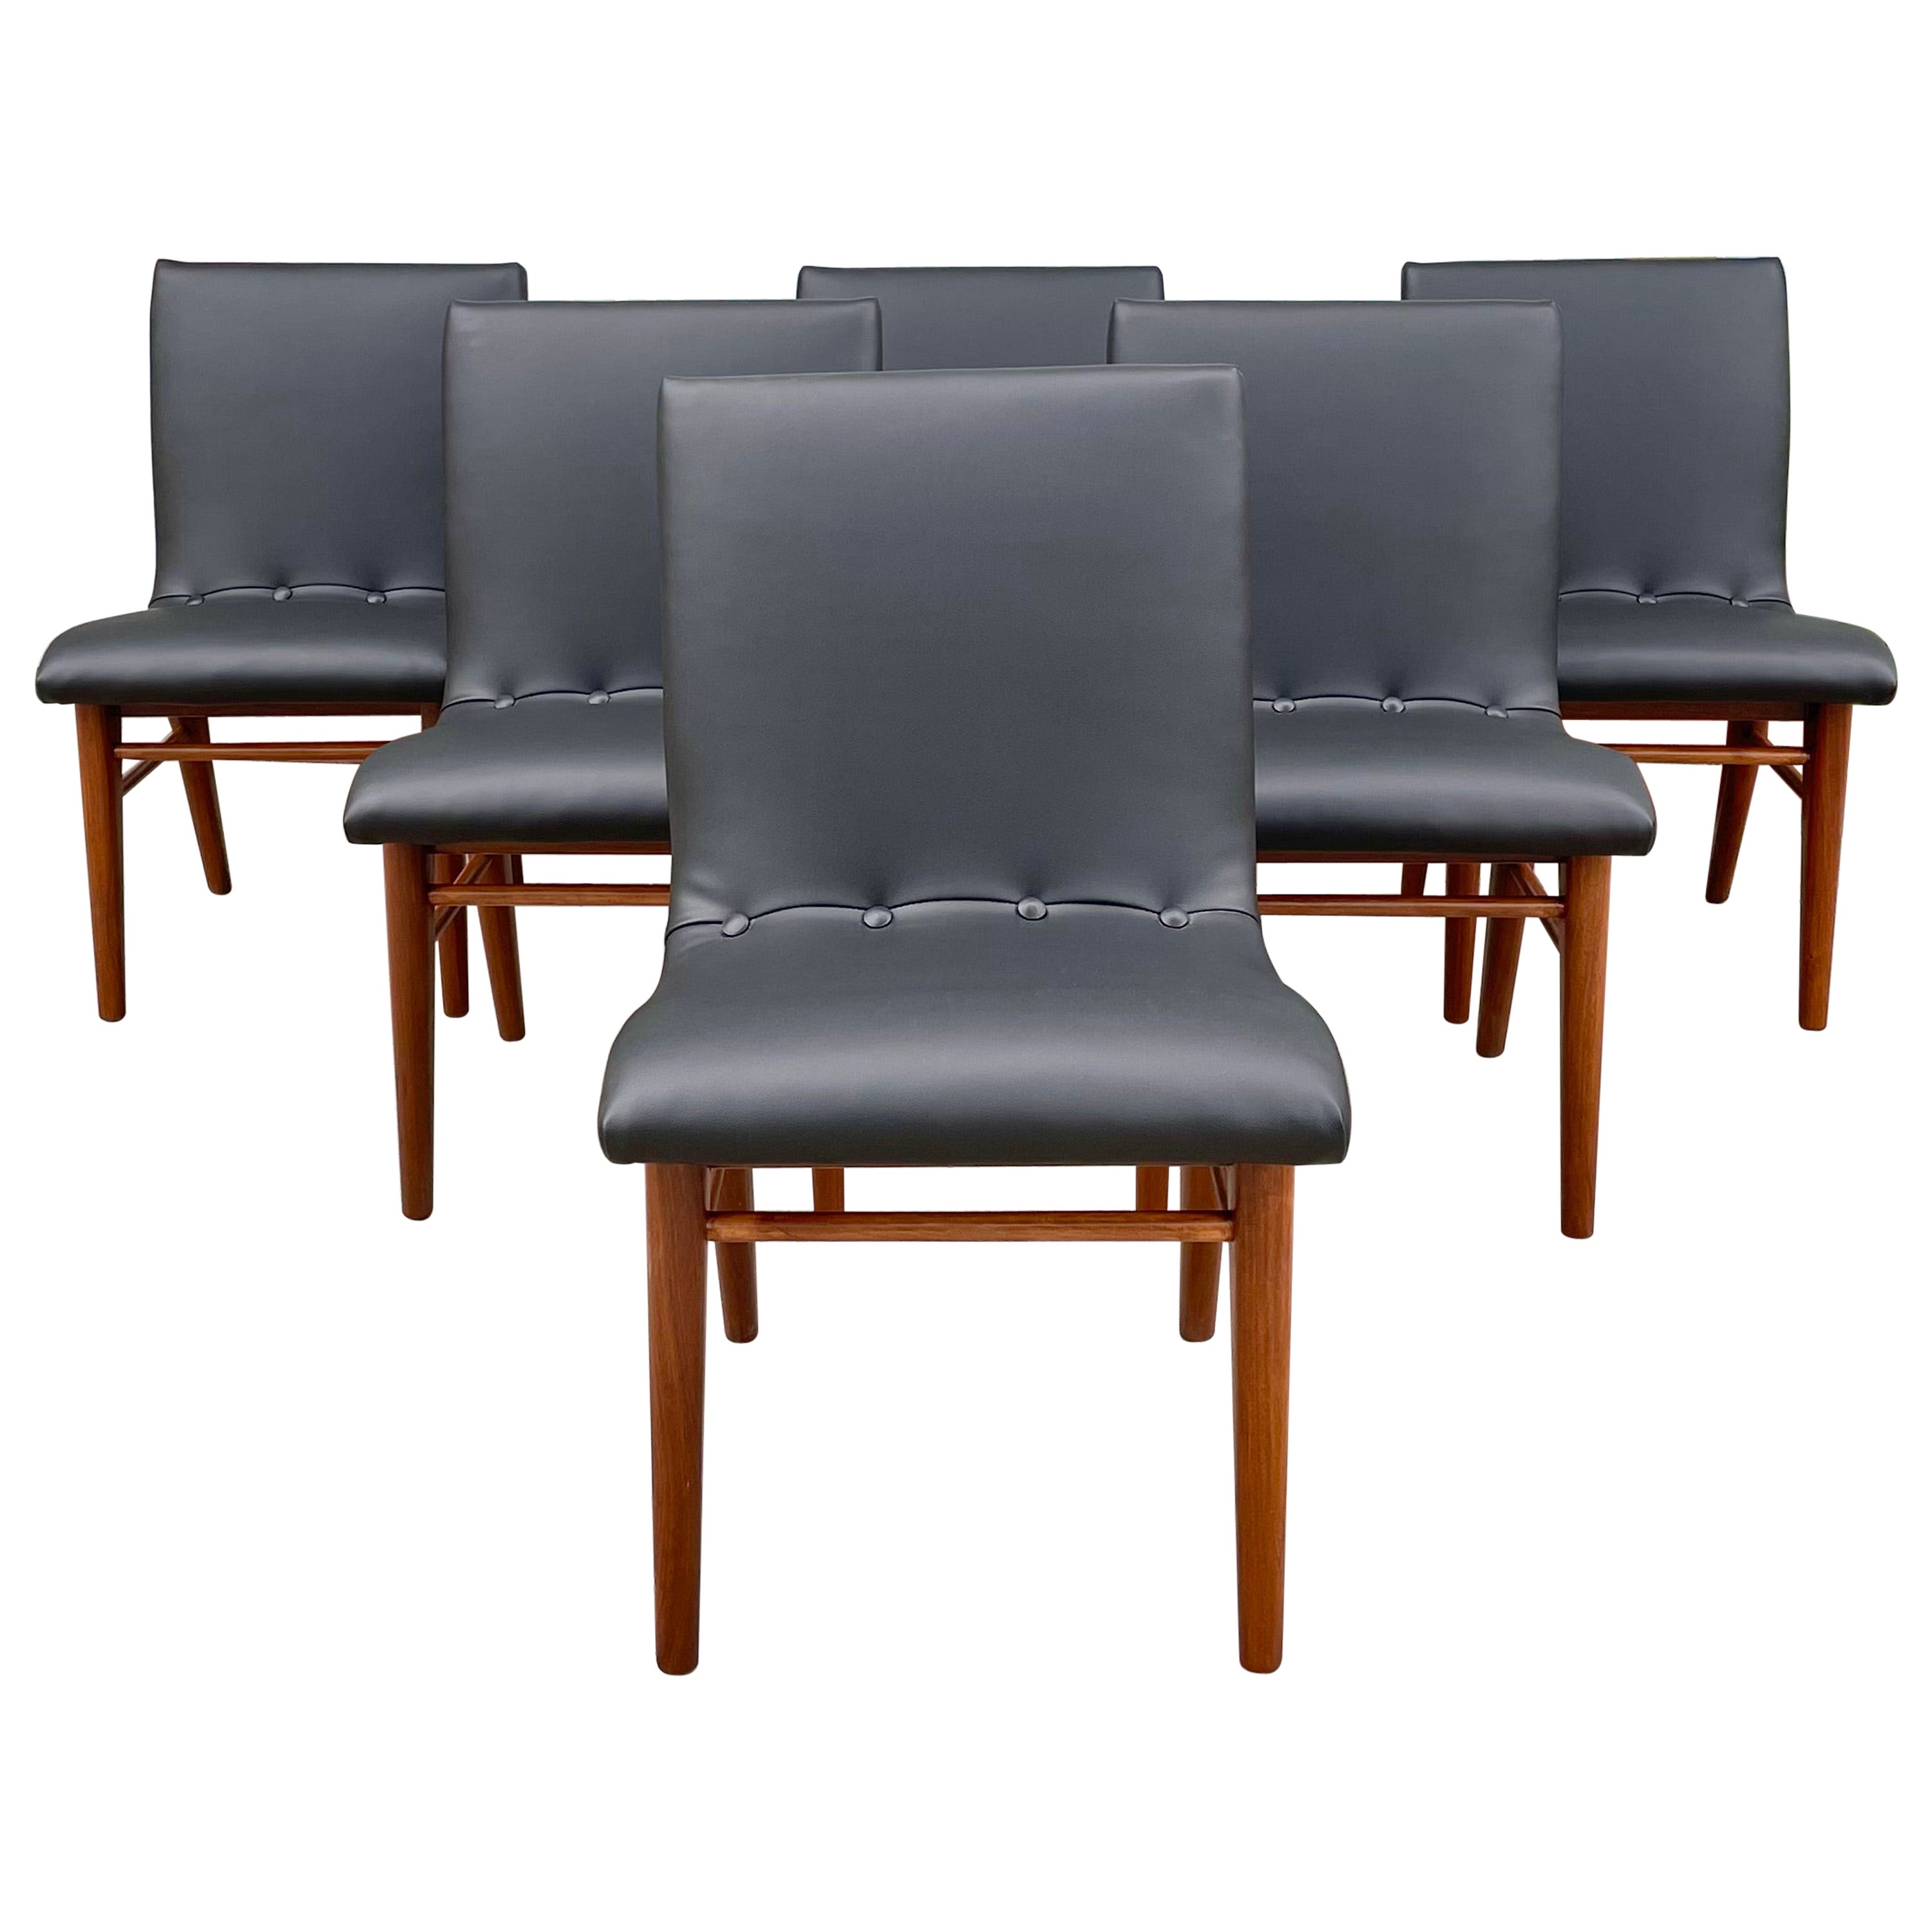 Midcentury Walnut & Leatherette Dining Chairs, Set of 6